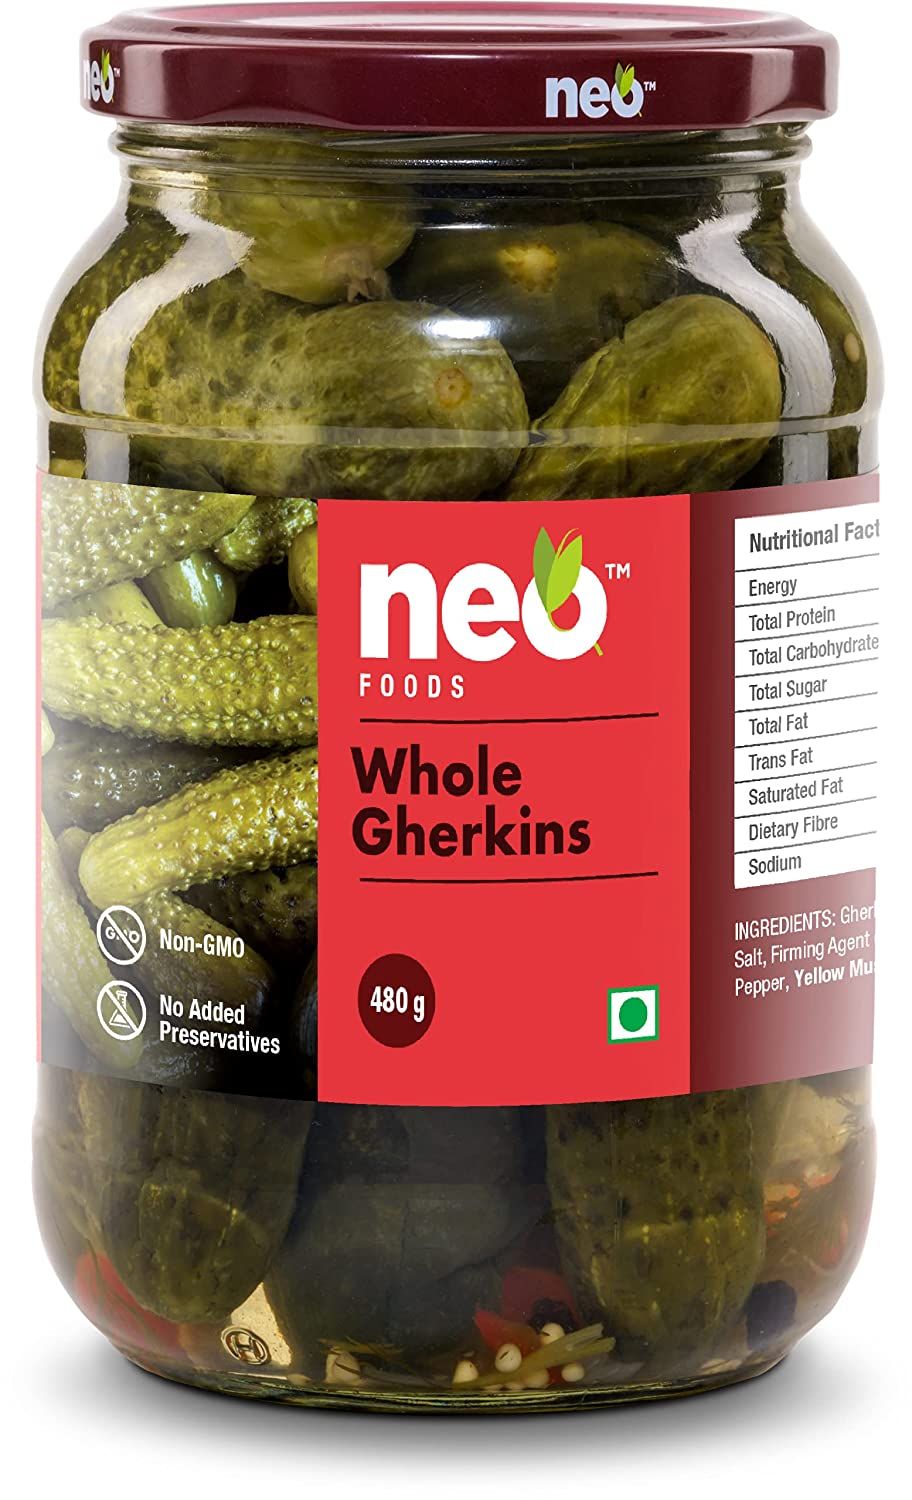 Neo Foods Whole Gherkins Image